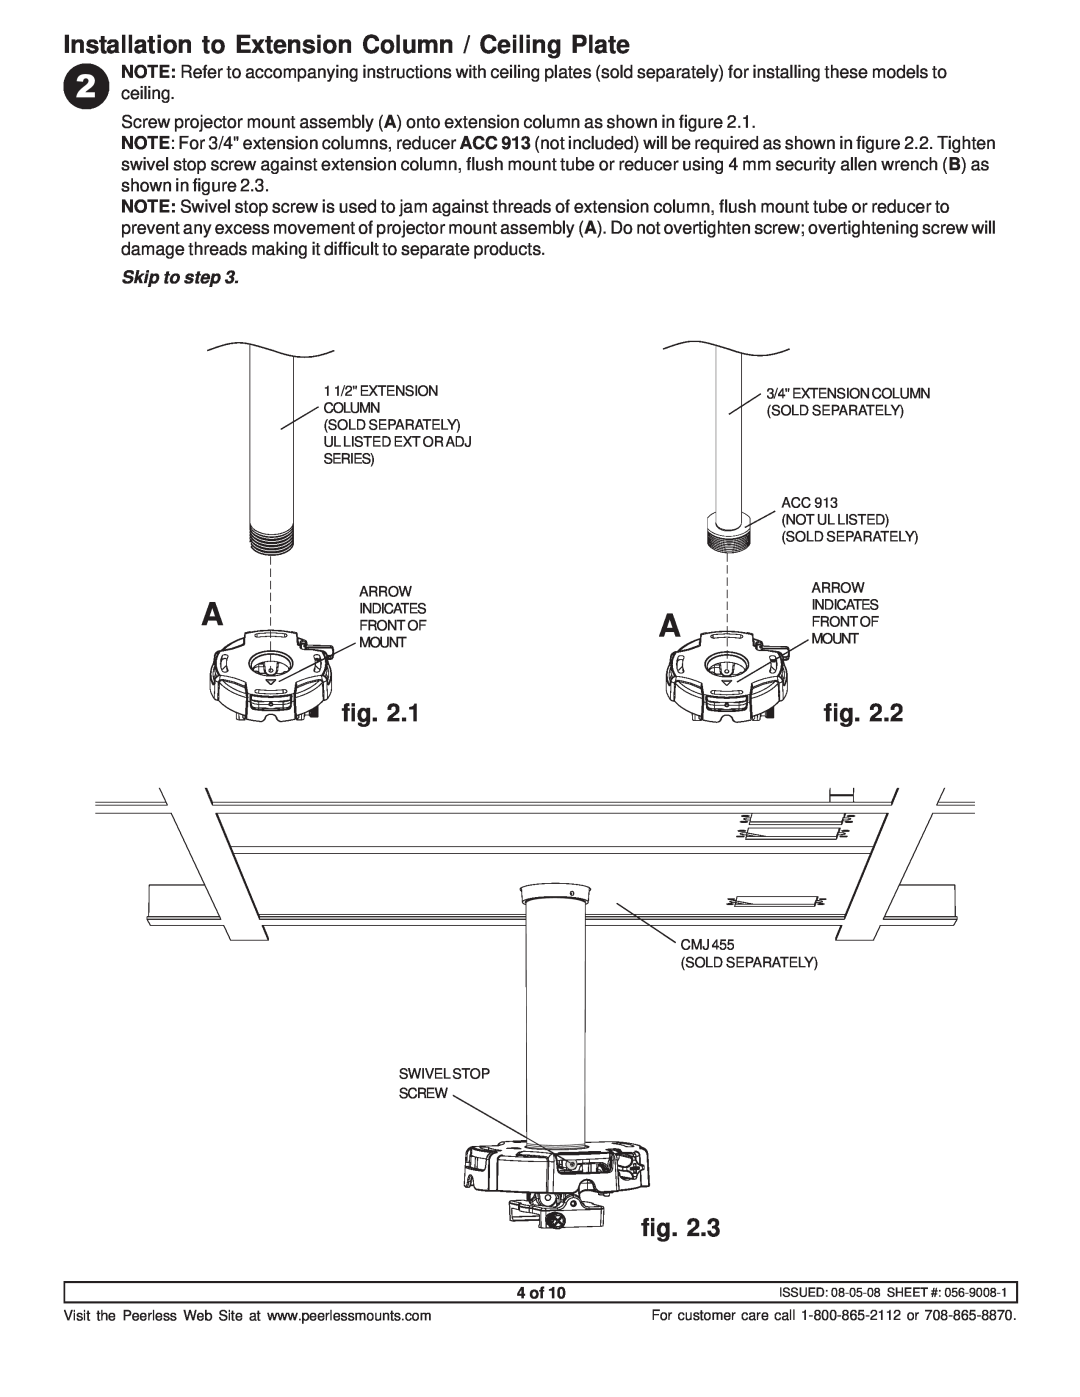 NEC NP600CM manual Installation to Extension Column / Ceiling Plate, Skip to step 